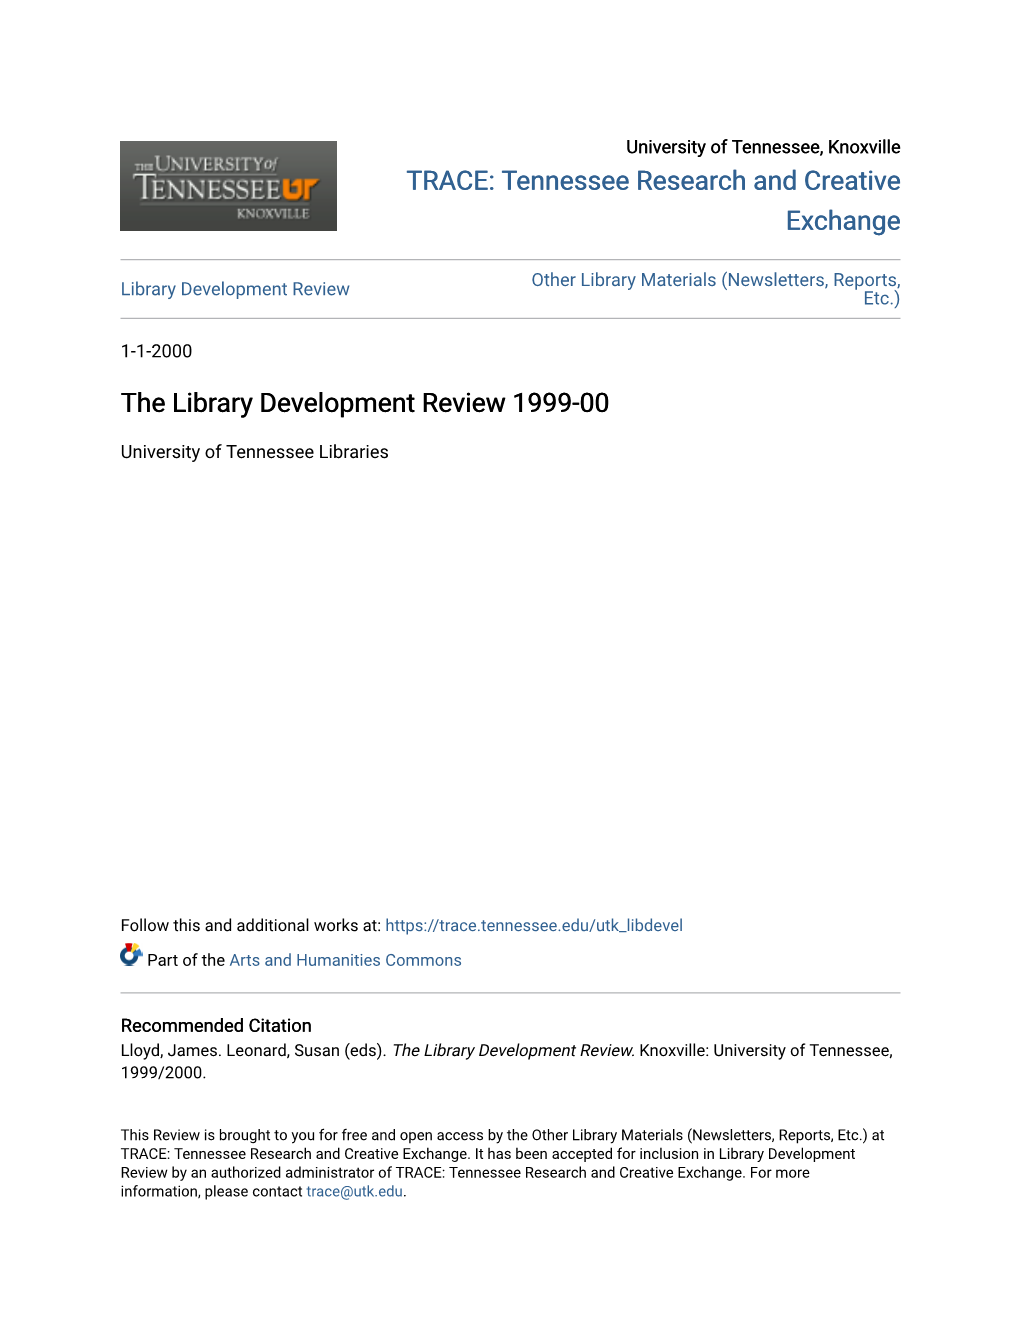 The Library Development Review 1999-00